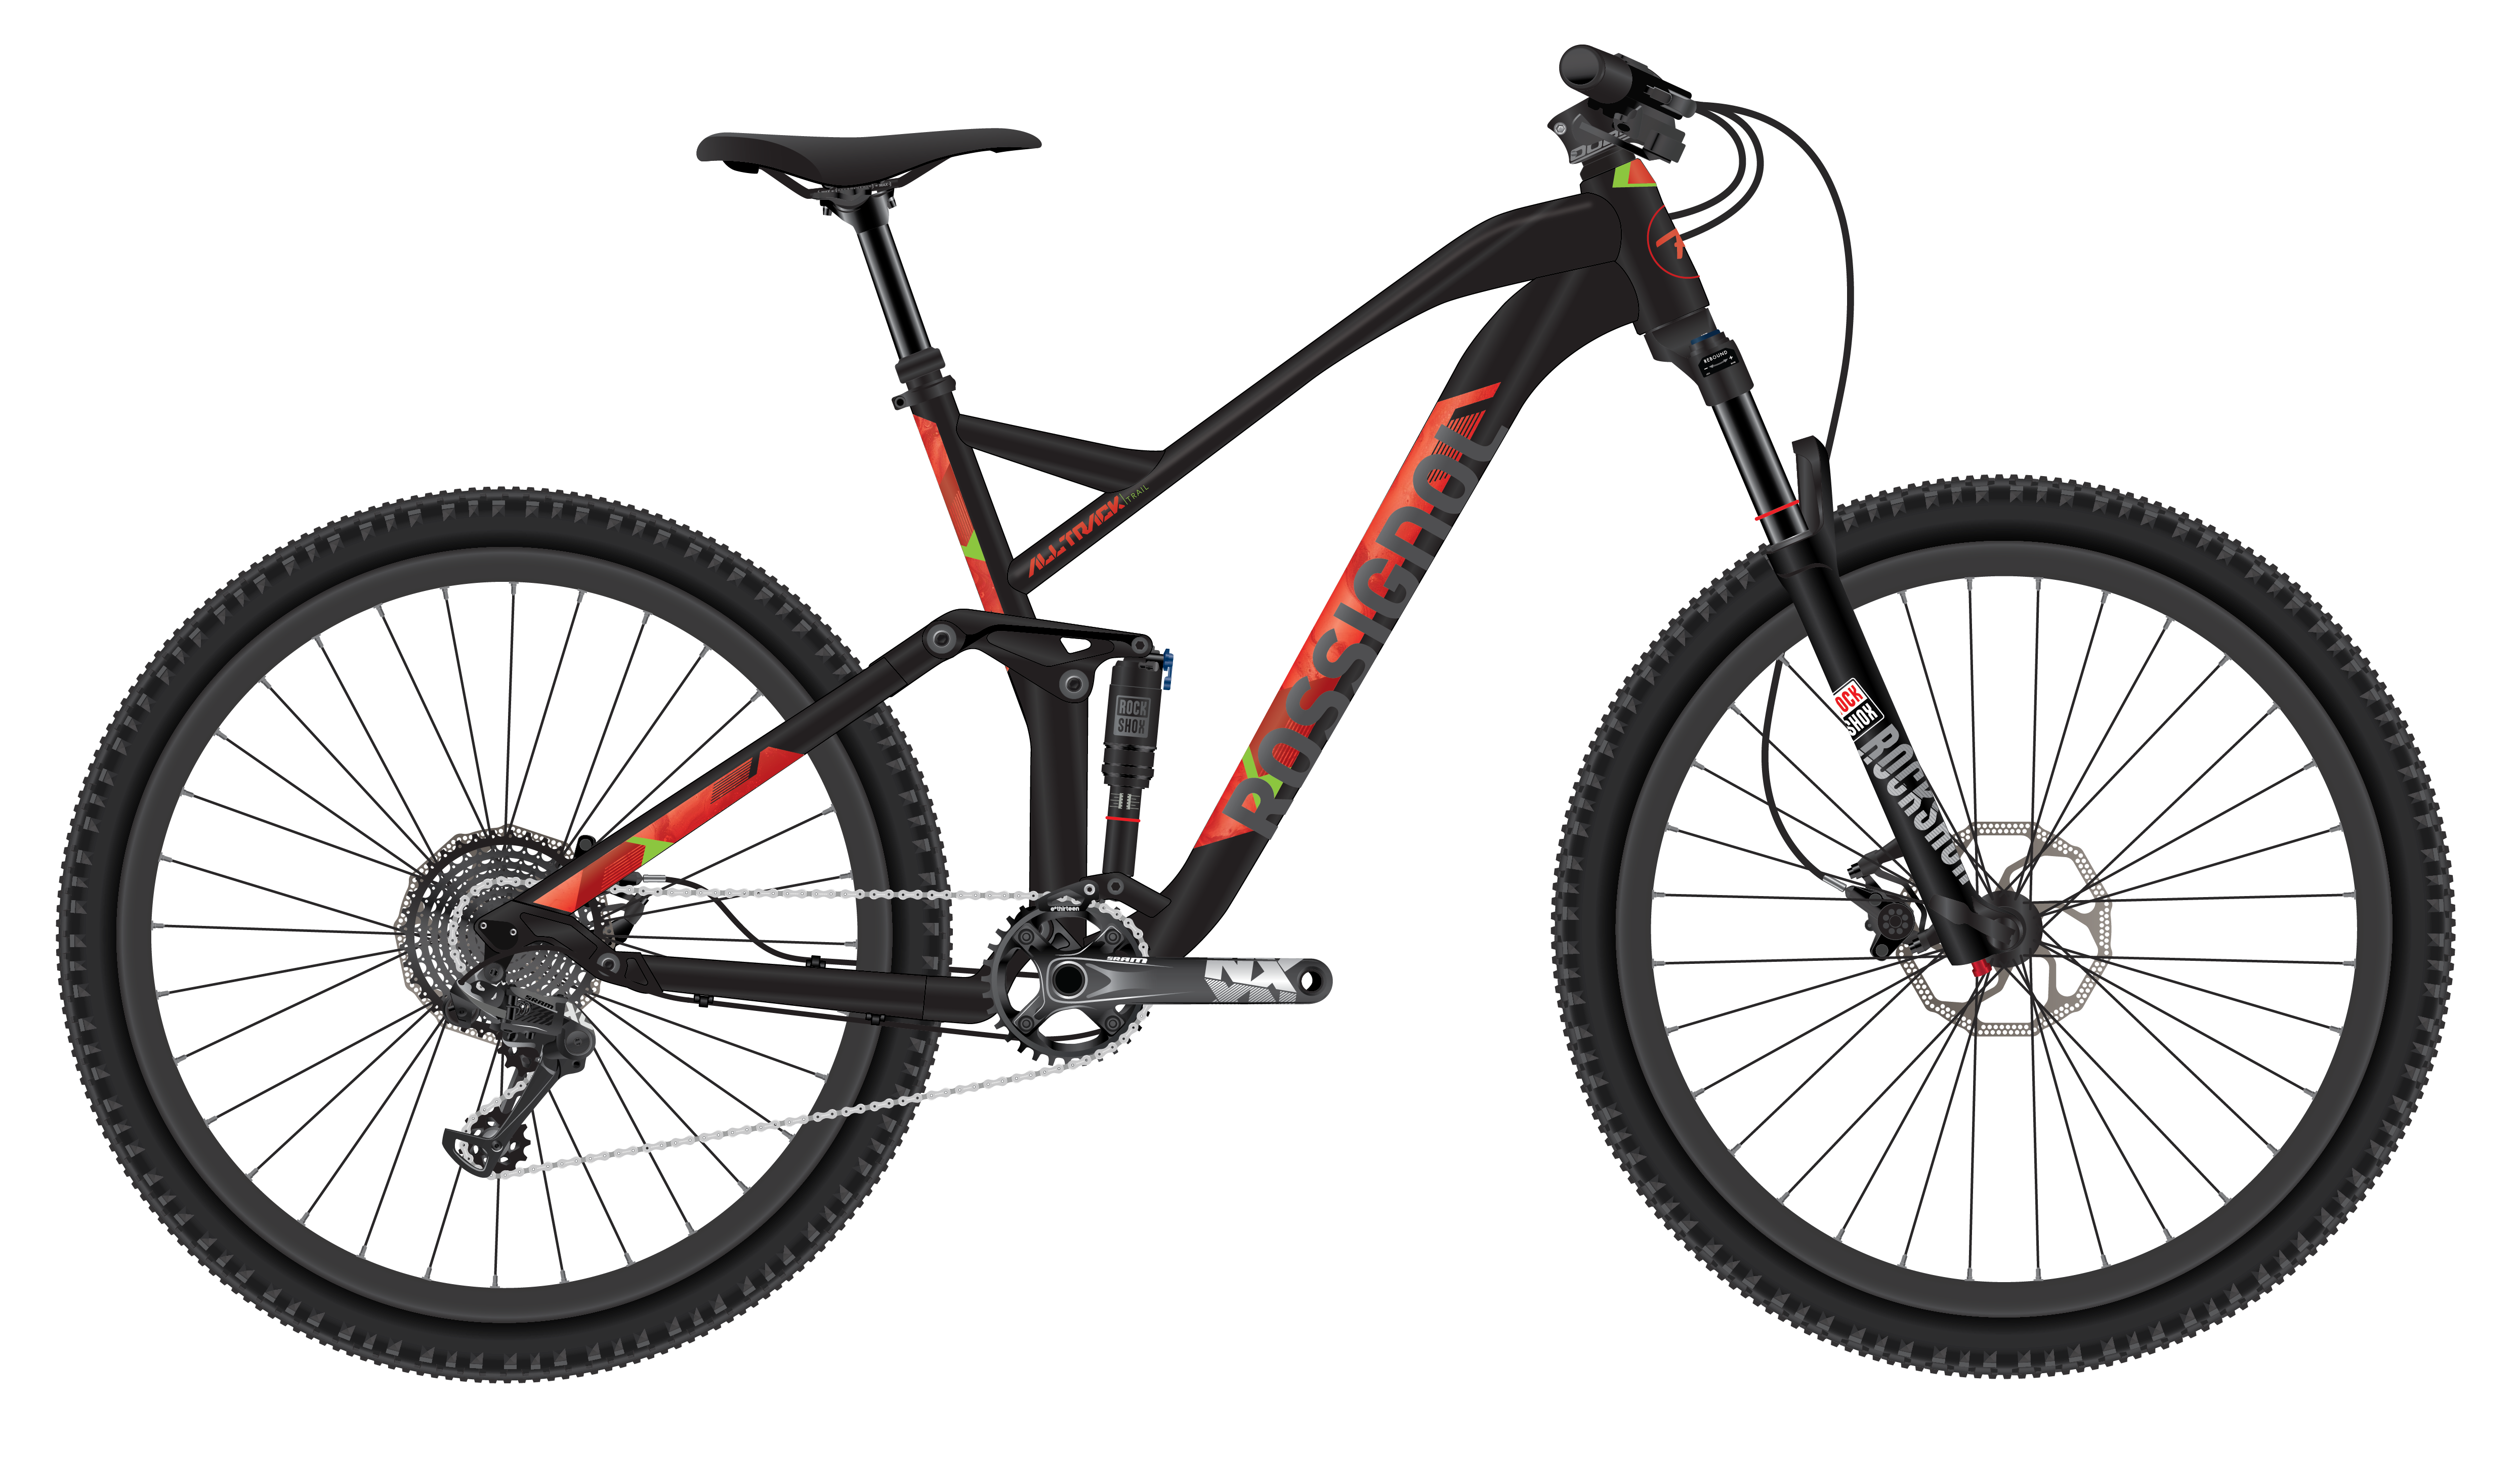 Rossignol's new mountain bikes discussed by Blister Review